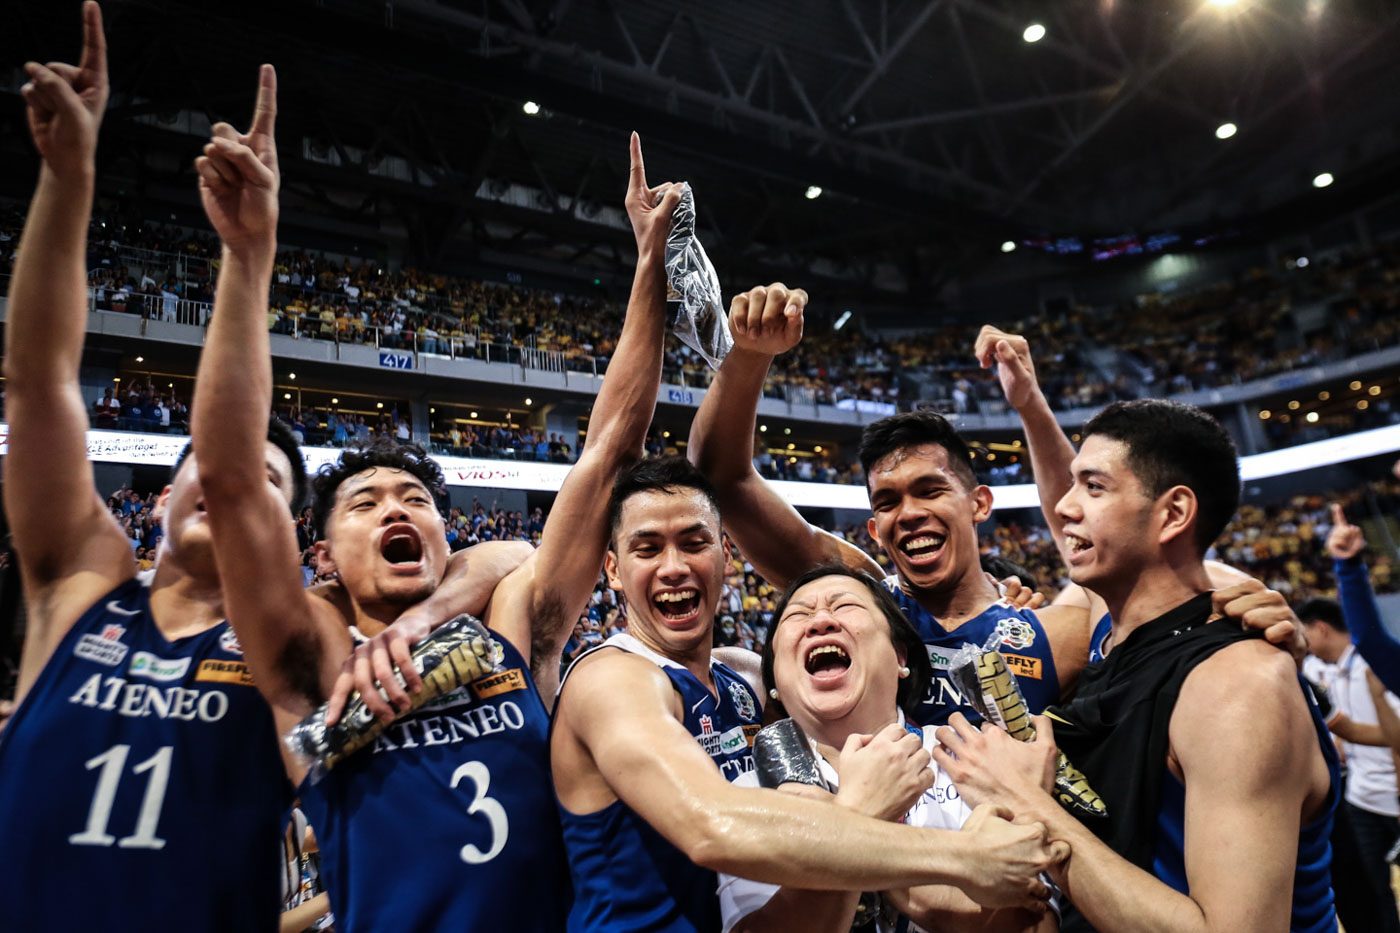 Baldwin glad to be proven wrong by Ateneo seniors core